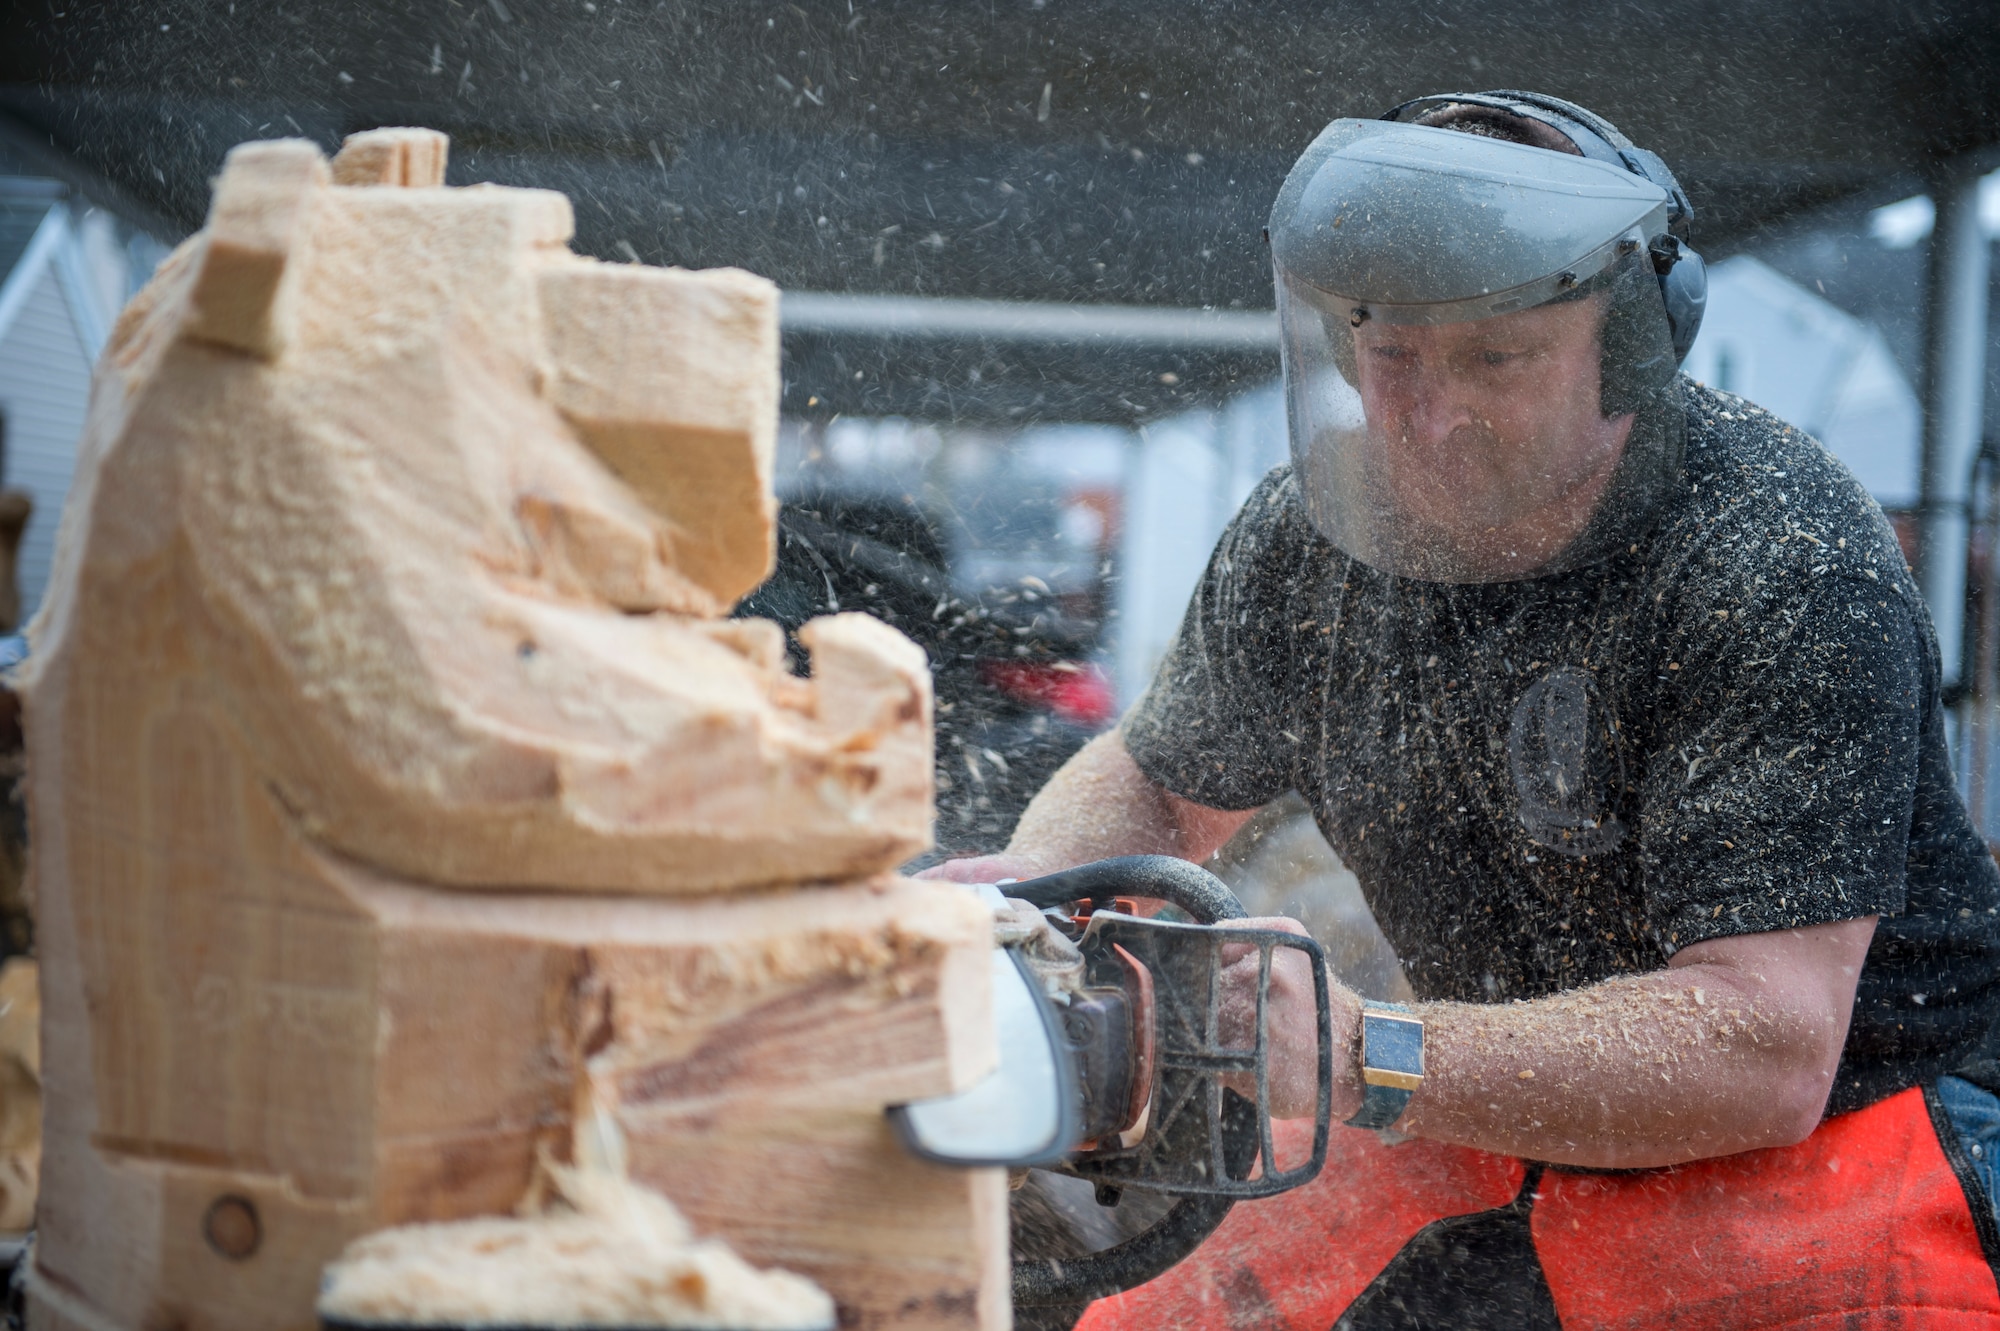 U.S. Air Force Tech. Sgt. Scott Herbert, 818th Mobility Support Advisory Squadron air advisor, uses a chainsaw to cut a rough figure of a bear statue March 12, 2020, Joint Base McGuire-Dix-Lakehurst, New Jersey. Herbert has been practicing chainsaw art for two years and has carved owls, eagles, rams, snails, trees, pumpkins, fish and bears. (U.S. Air Force photo by Staff Sgt. Sarah Brice)